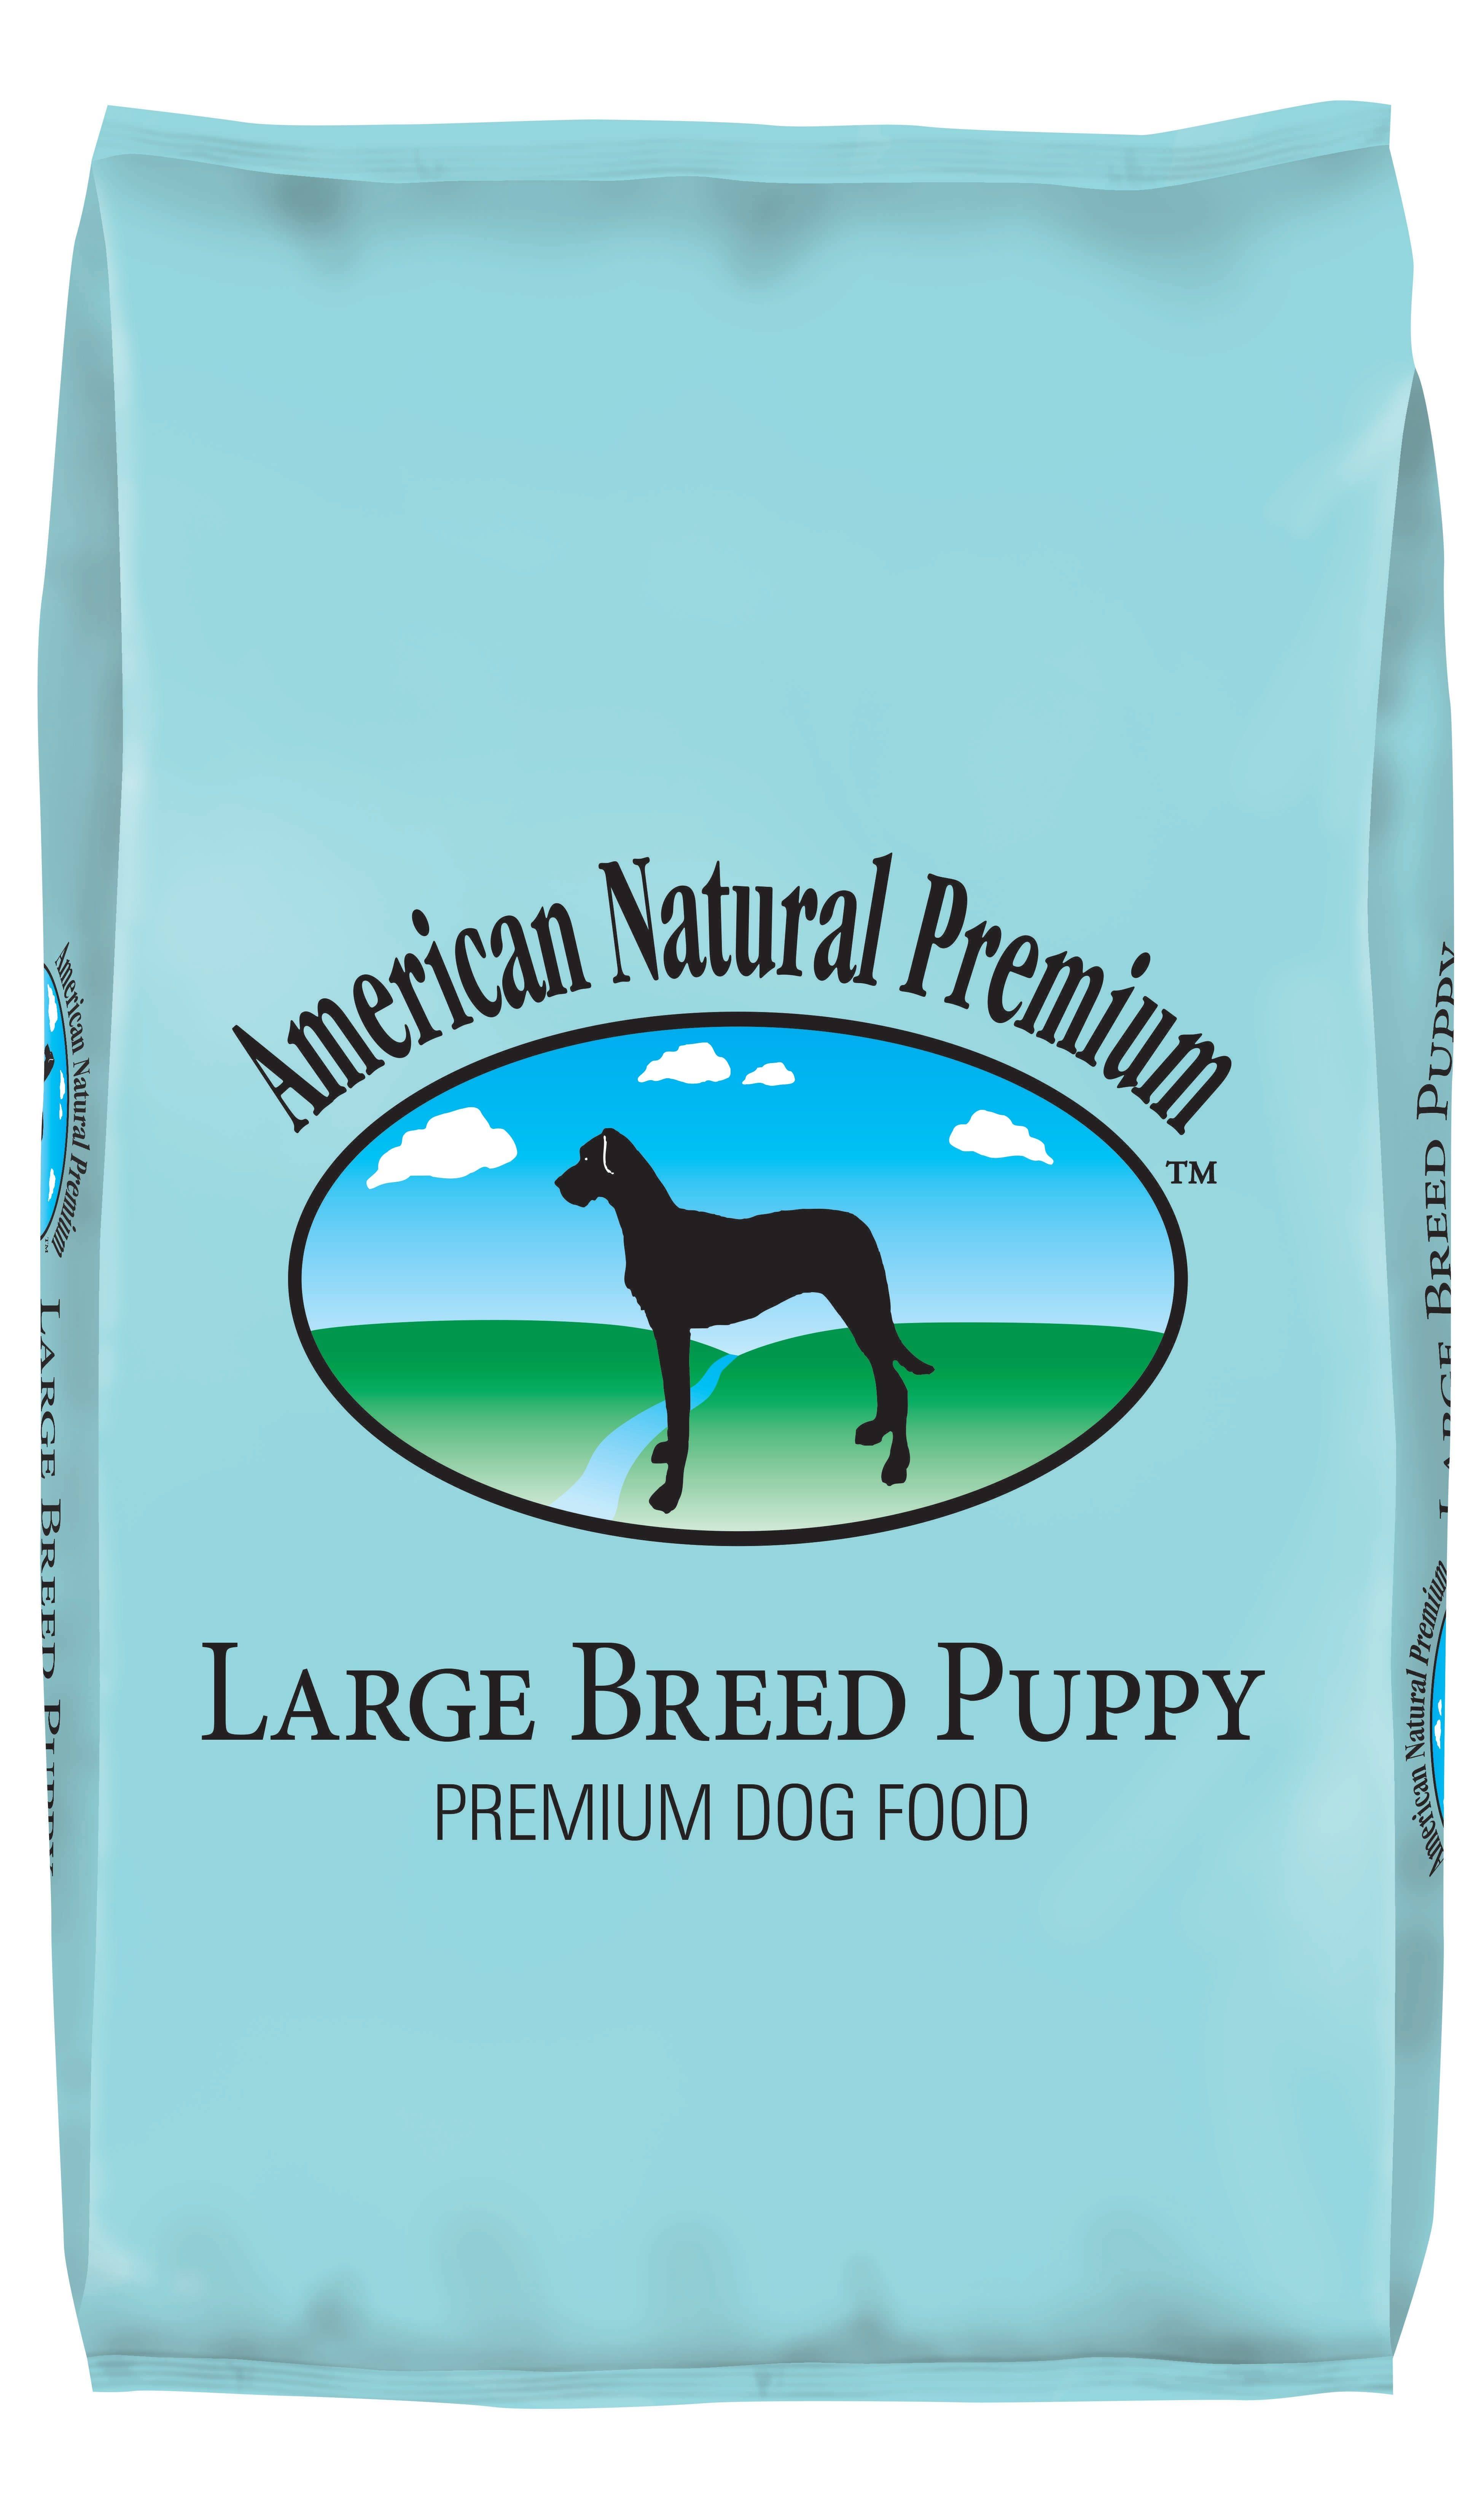 American Natural Premium, Large Breed Puppy Food, 30lbs